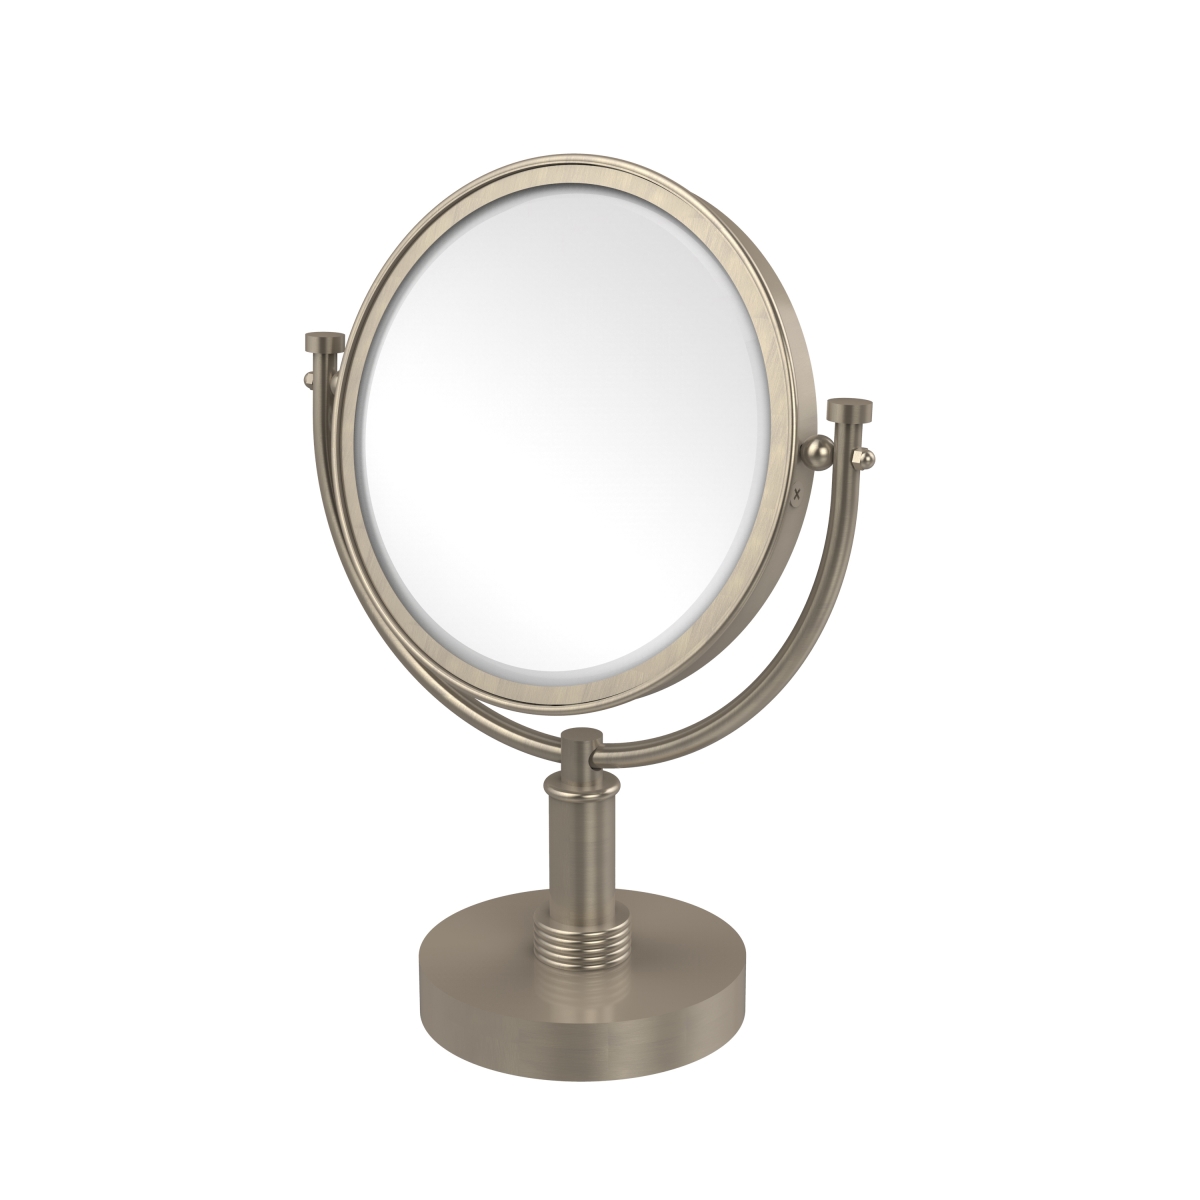 Picture of Allied Brass DM-4G-2X-PEW 8 in. Vanity Top Make-Up Mirror 2X Magnification, Antique Pewter - 15 x 8 x 8 in.